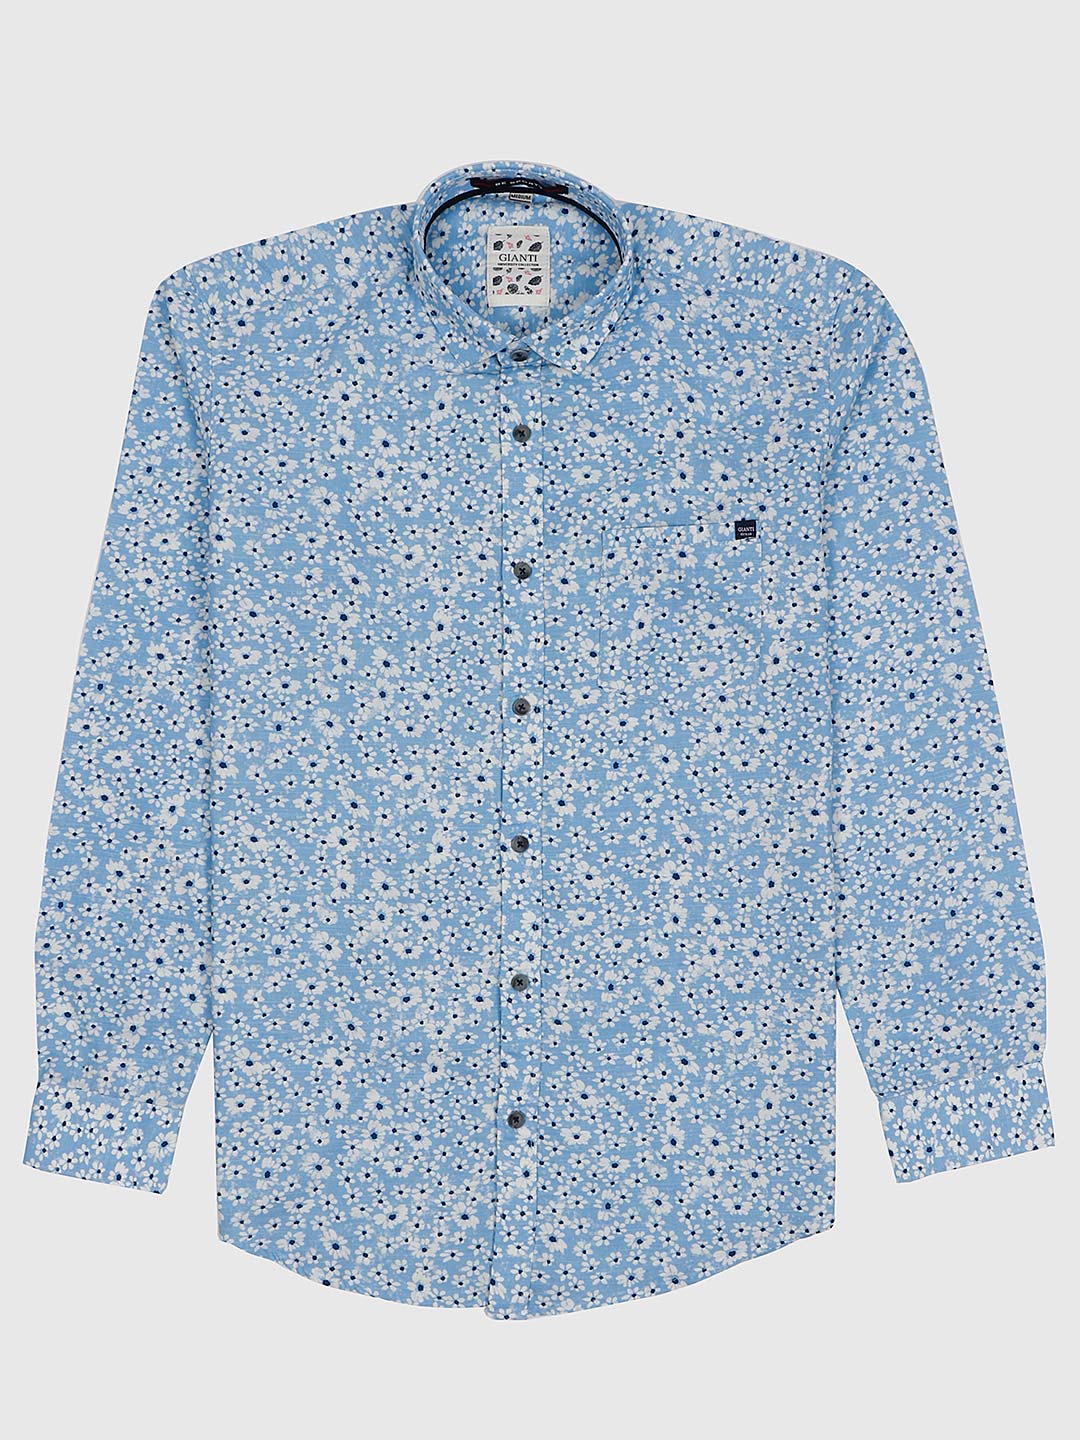 Sky Blue Floral Shirt Off 74 Free Shipping - best roblox shirt off 74 free shipping